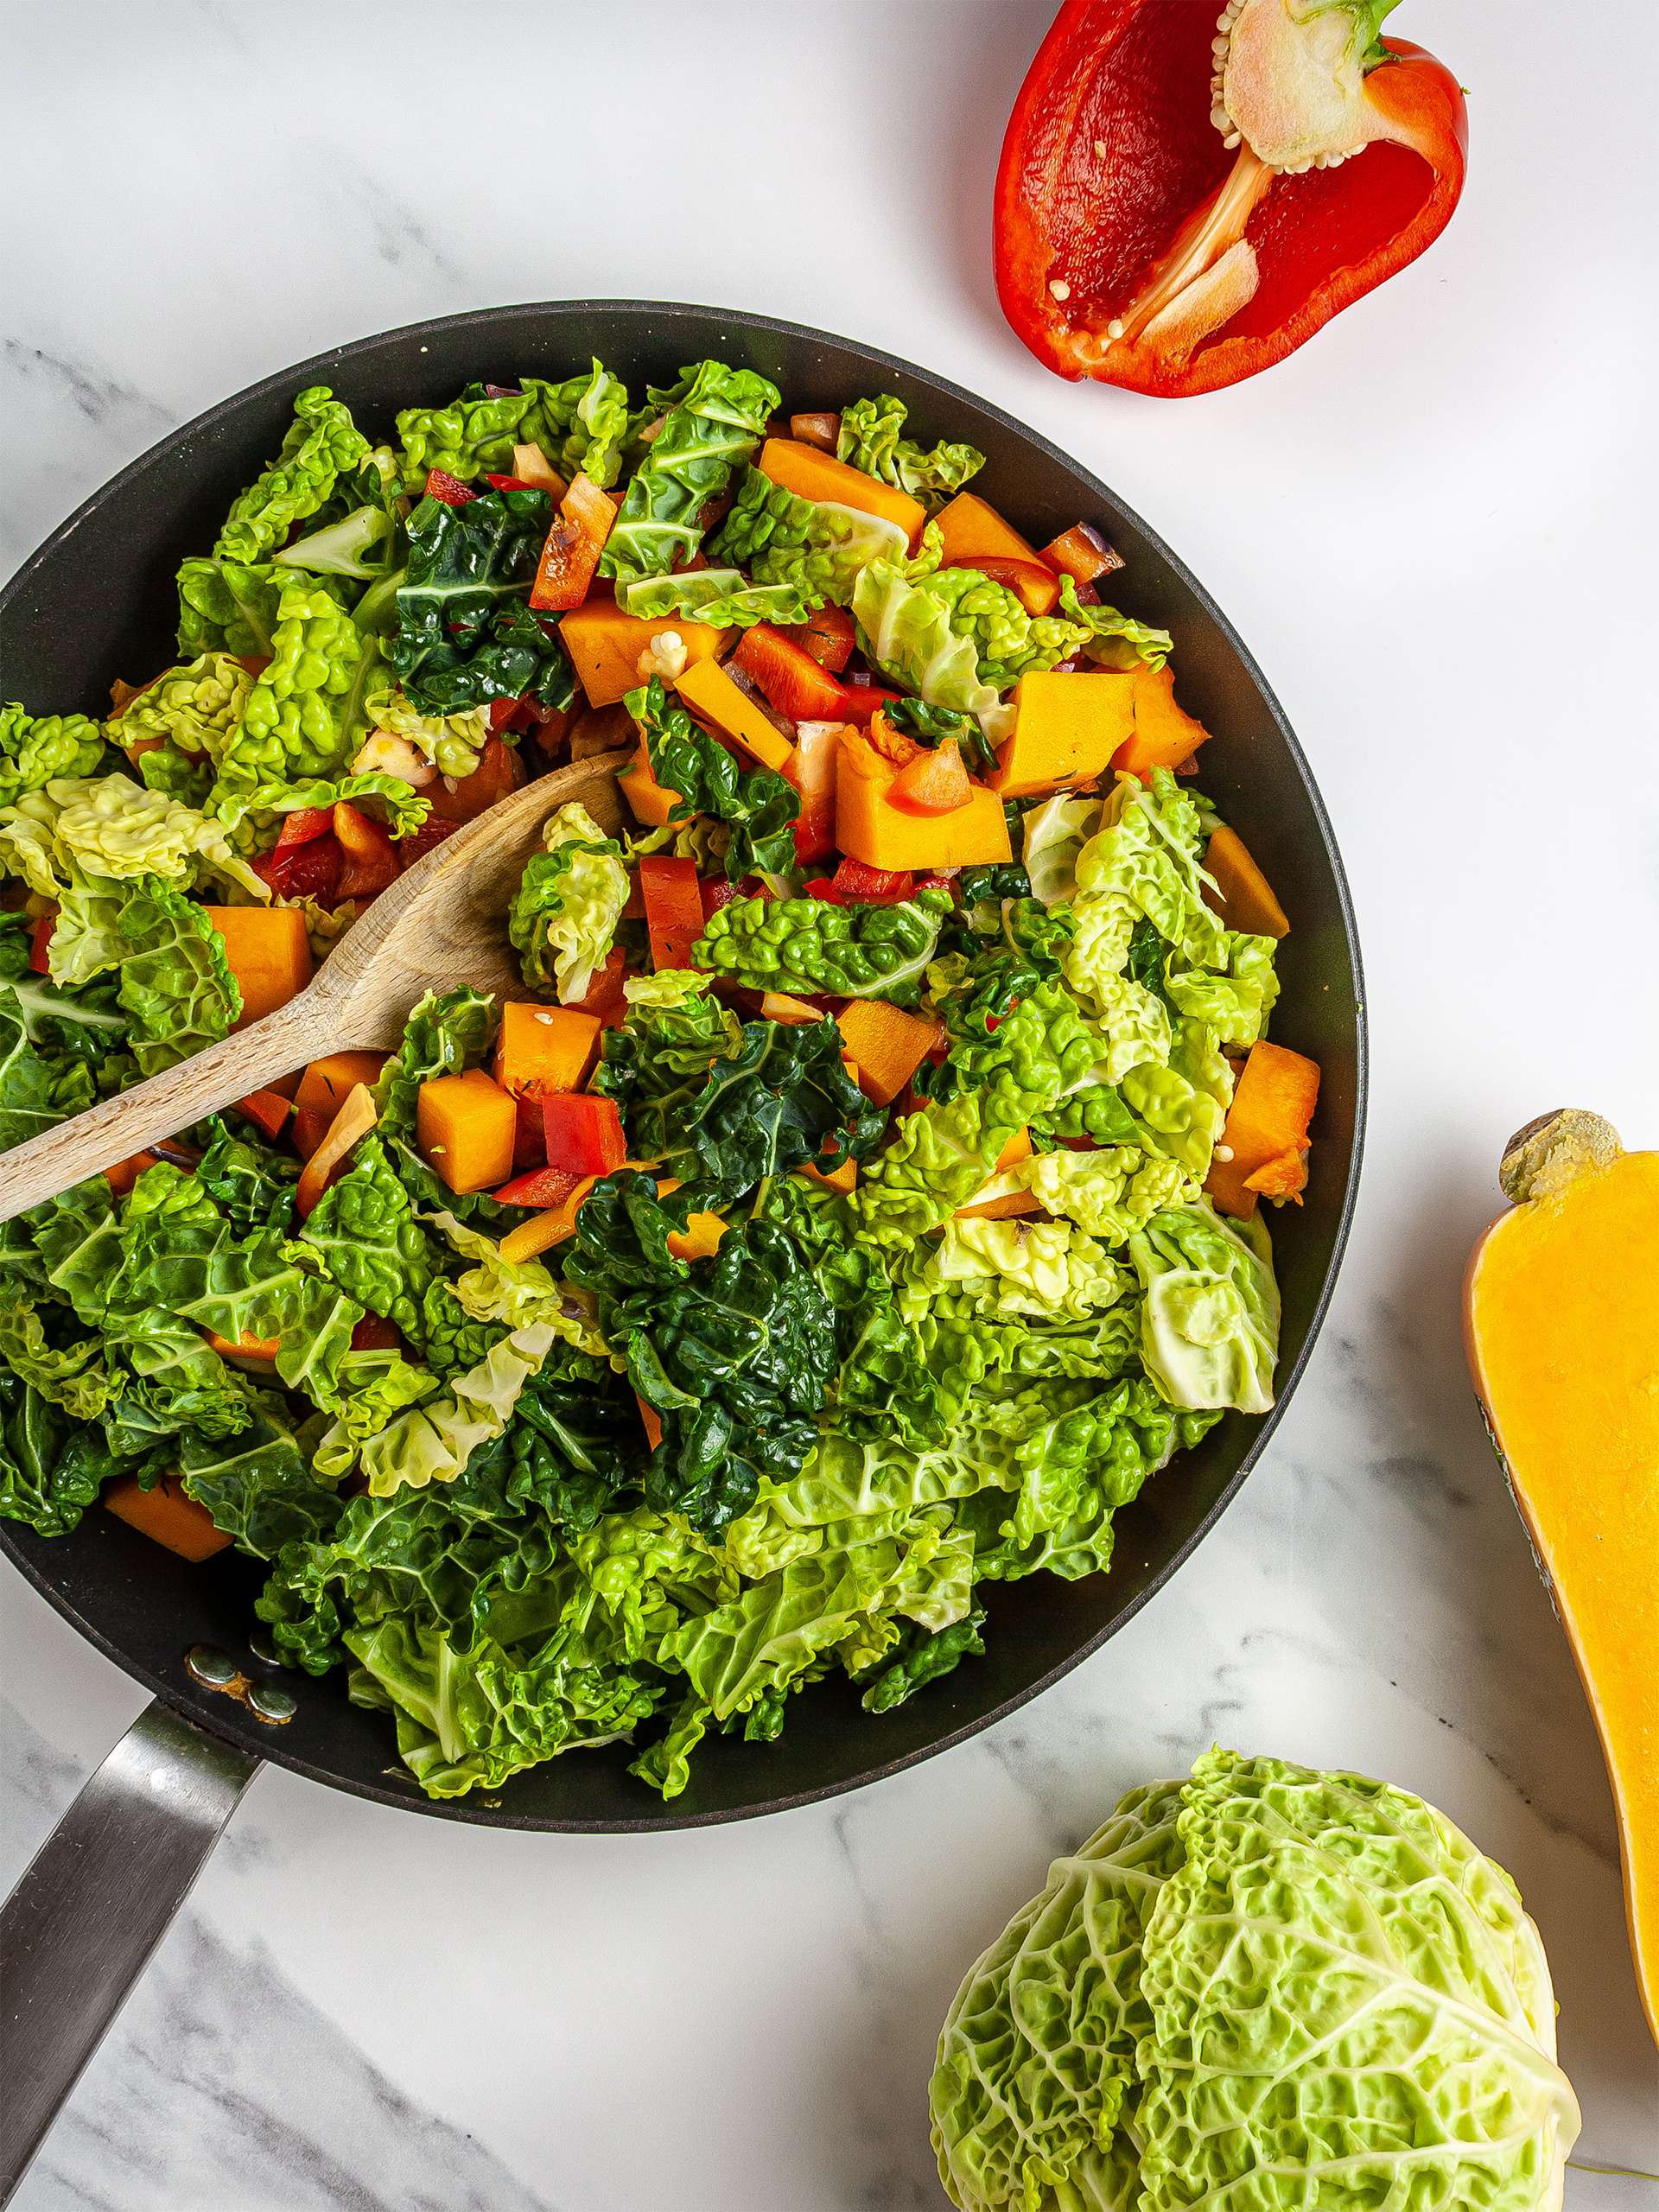 Cabbage, pumpkin, and red peppers cooking in a skillet.